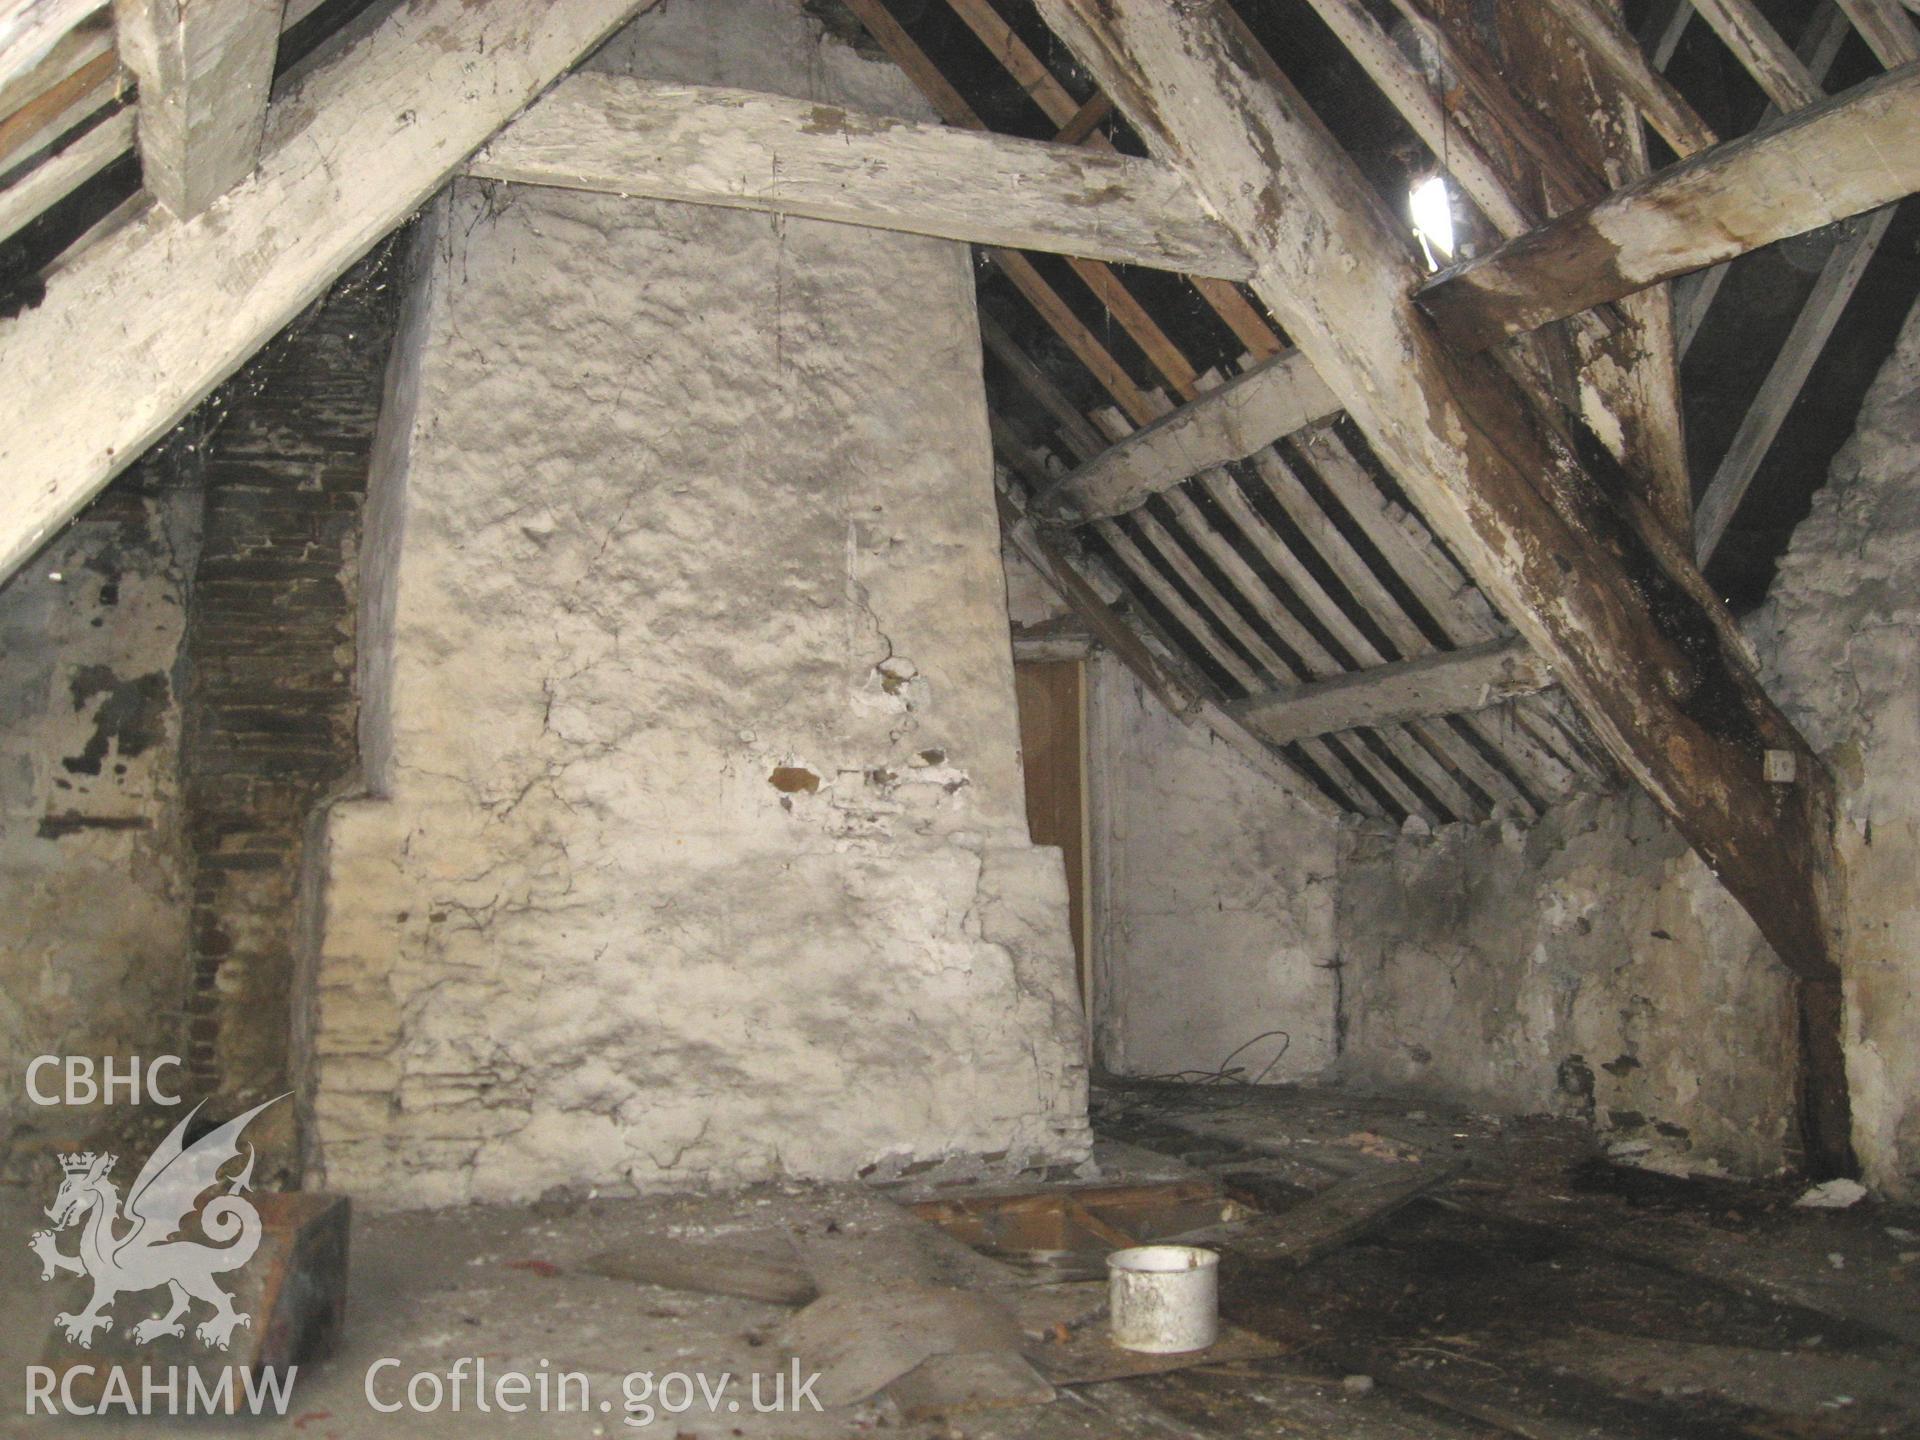 Colour photo showing the attic at the Fountain Inn, taken by Paul R. Davis and dated 2nd February 2013.